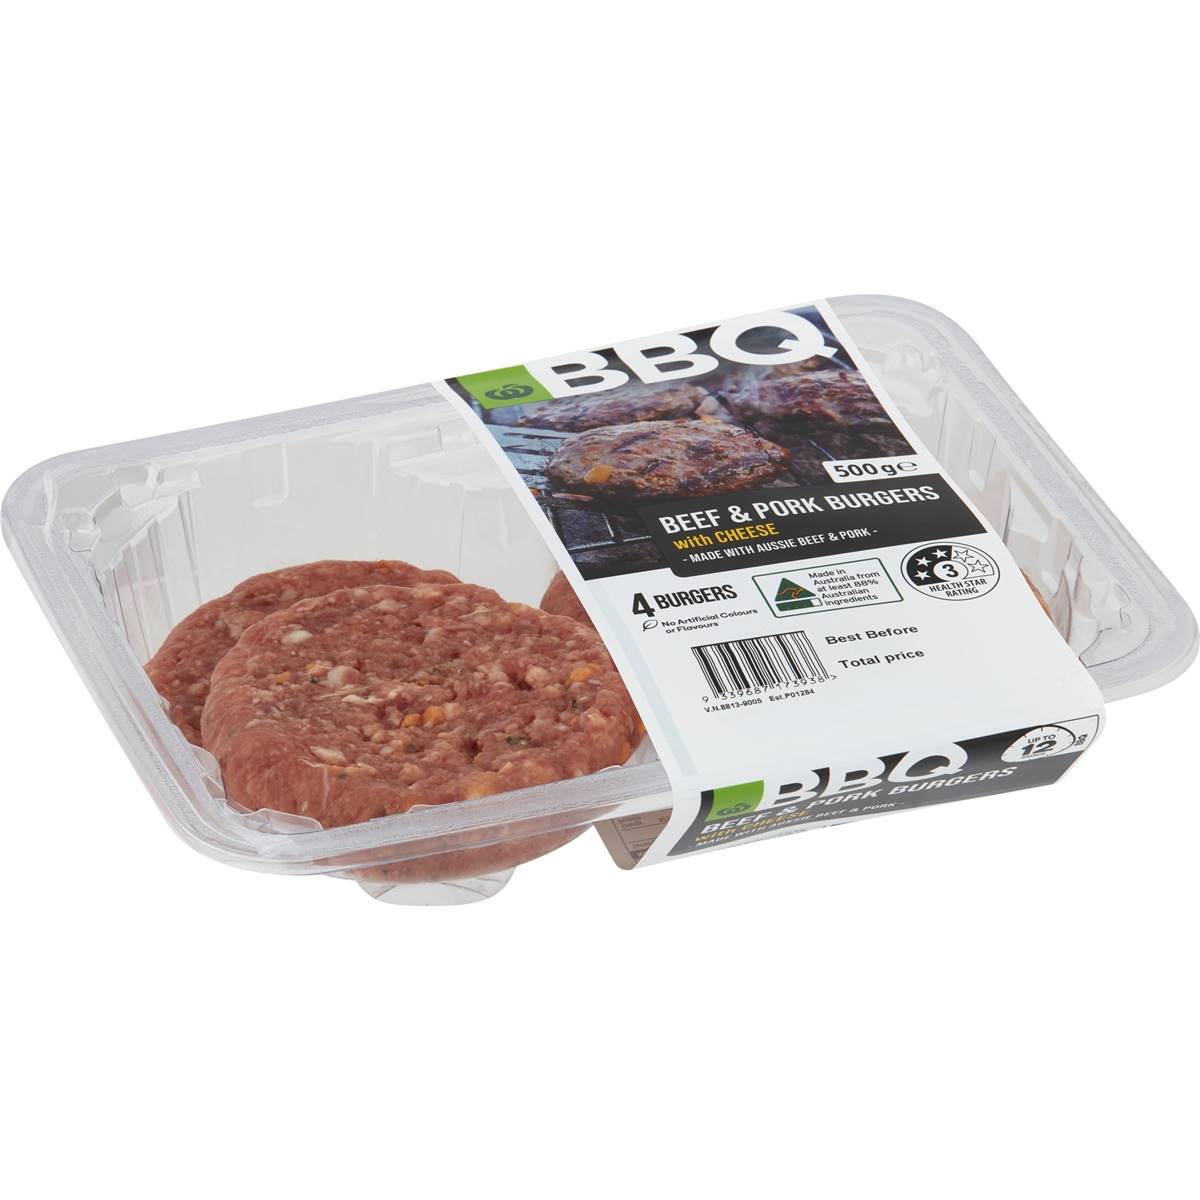 Calories in Woolworths Bbq Beef & Pork Burgers With Cheese